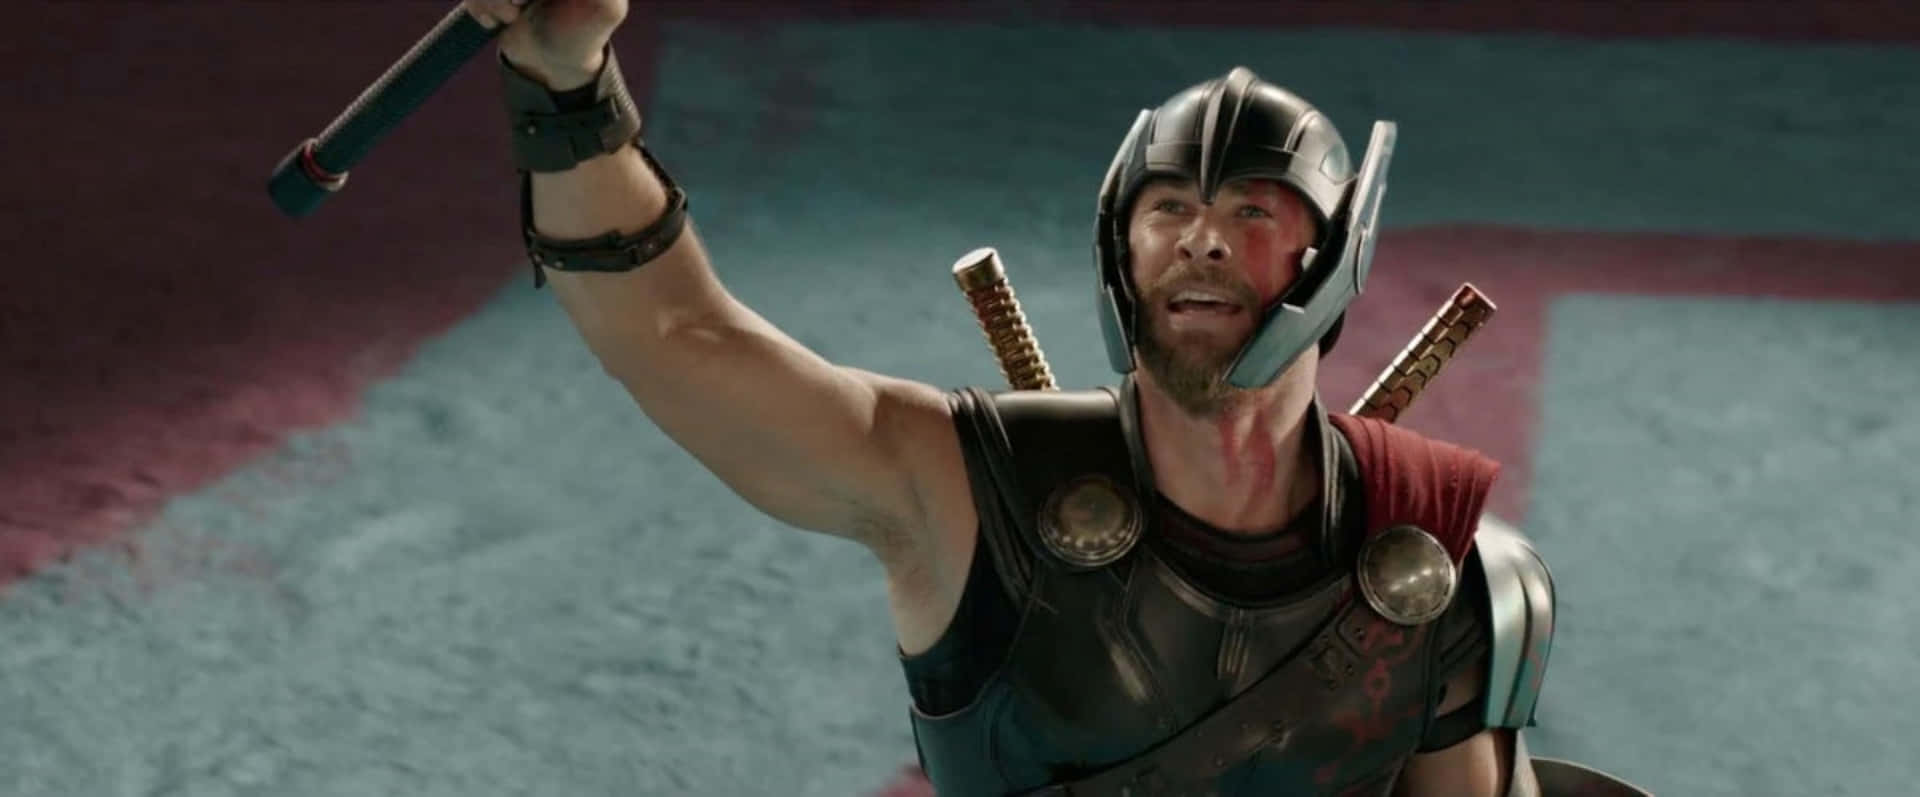 Funny Marvel Thor Raising Hammer Picture